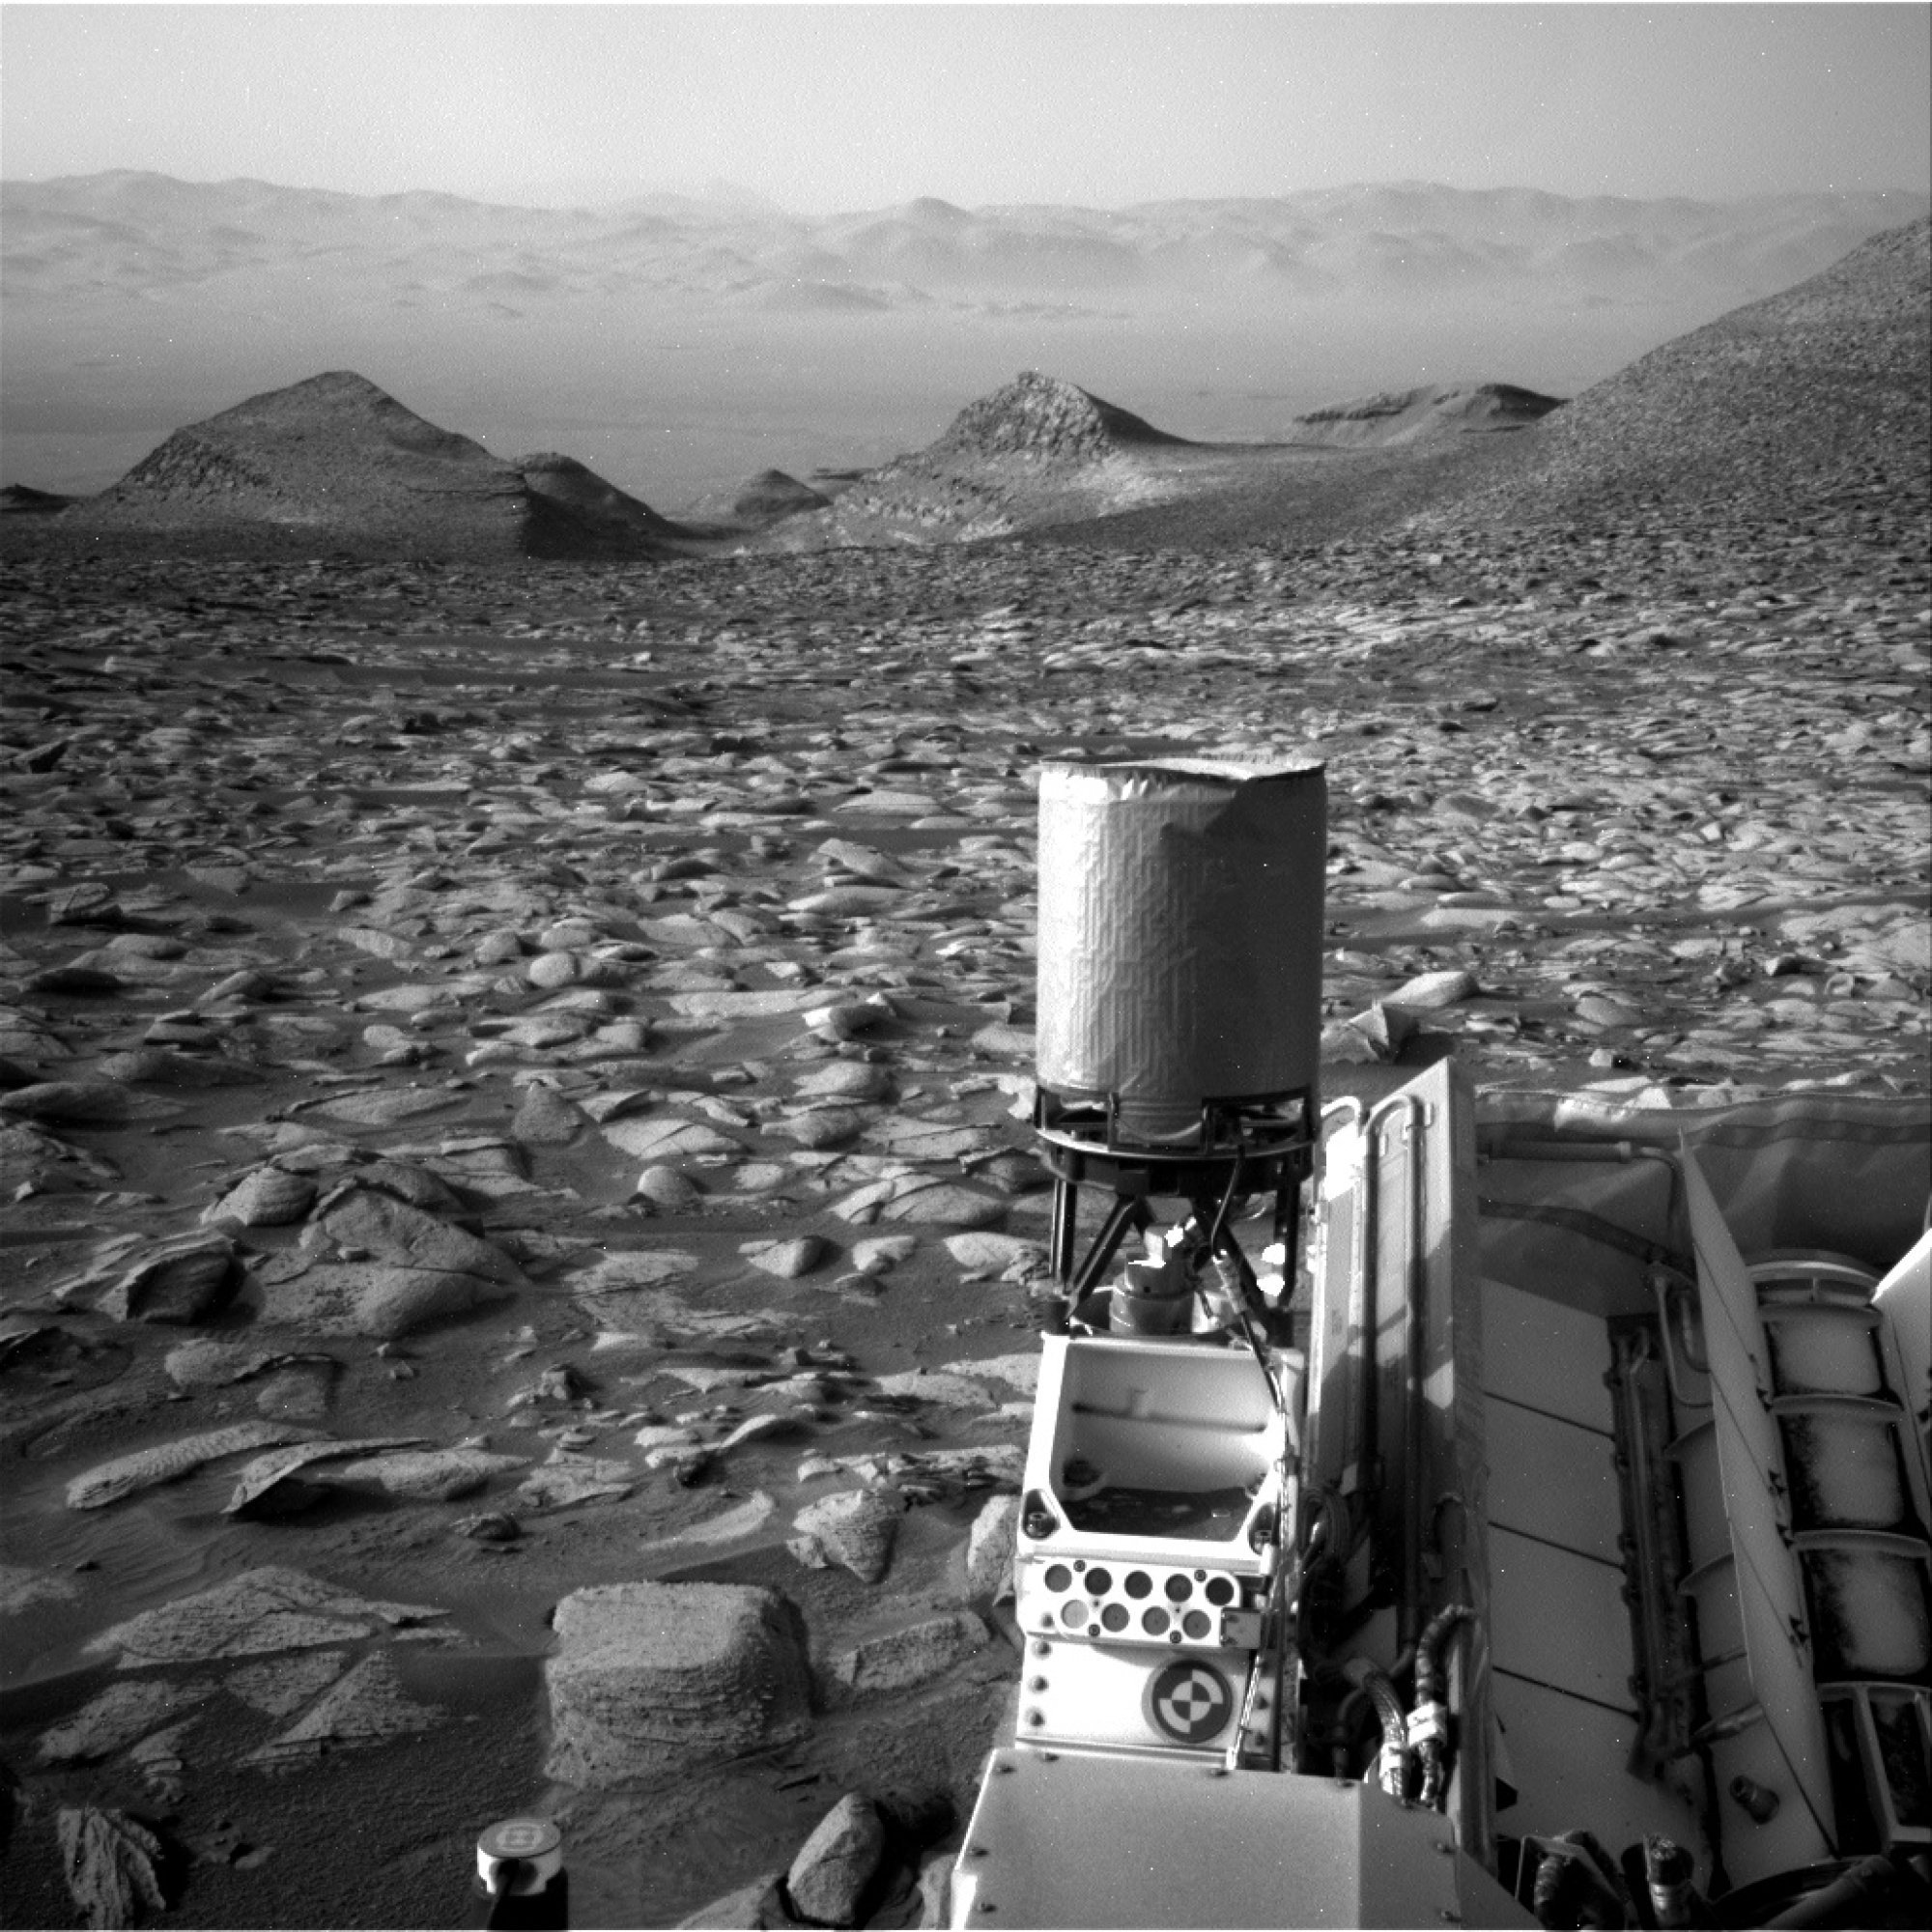 Curiosity rover looking out for dust storms